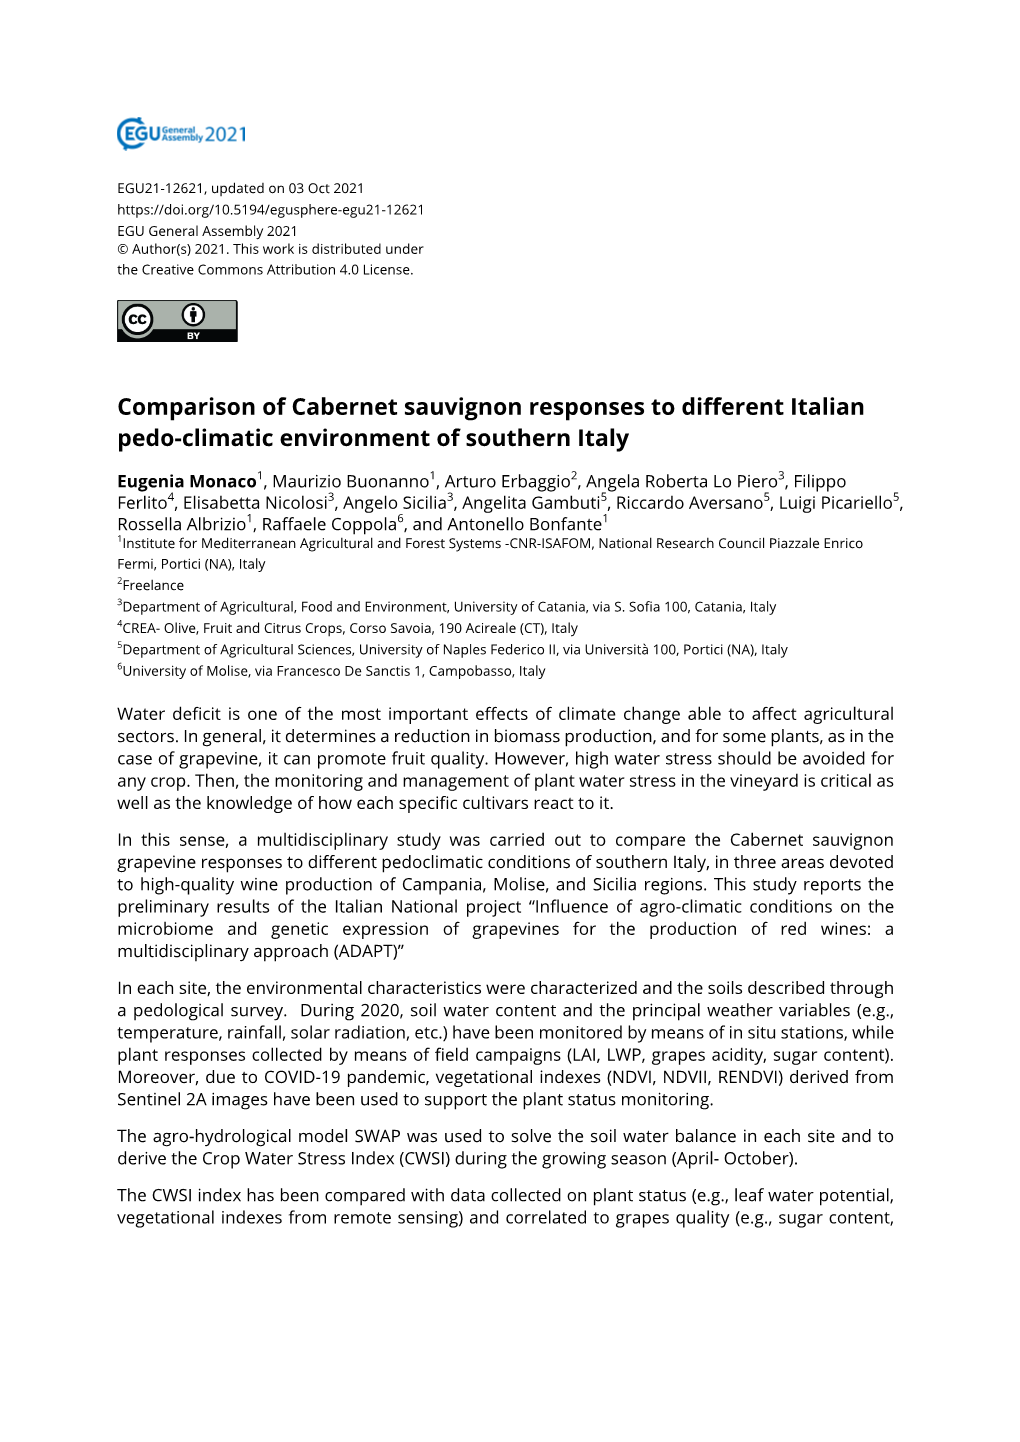 Comparison of Cabernet Sauvignon Responses to Different Italian Pedo-Climatic Environment of Southern Italy